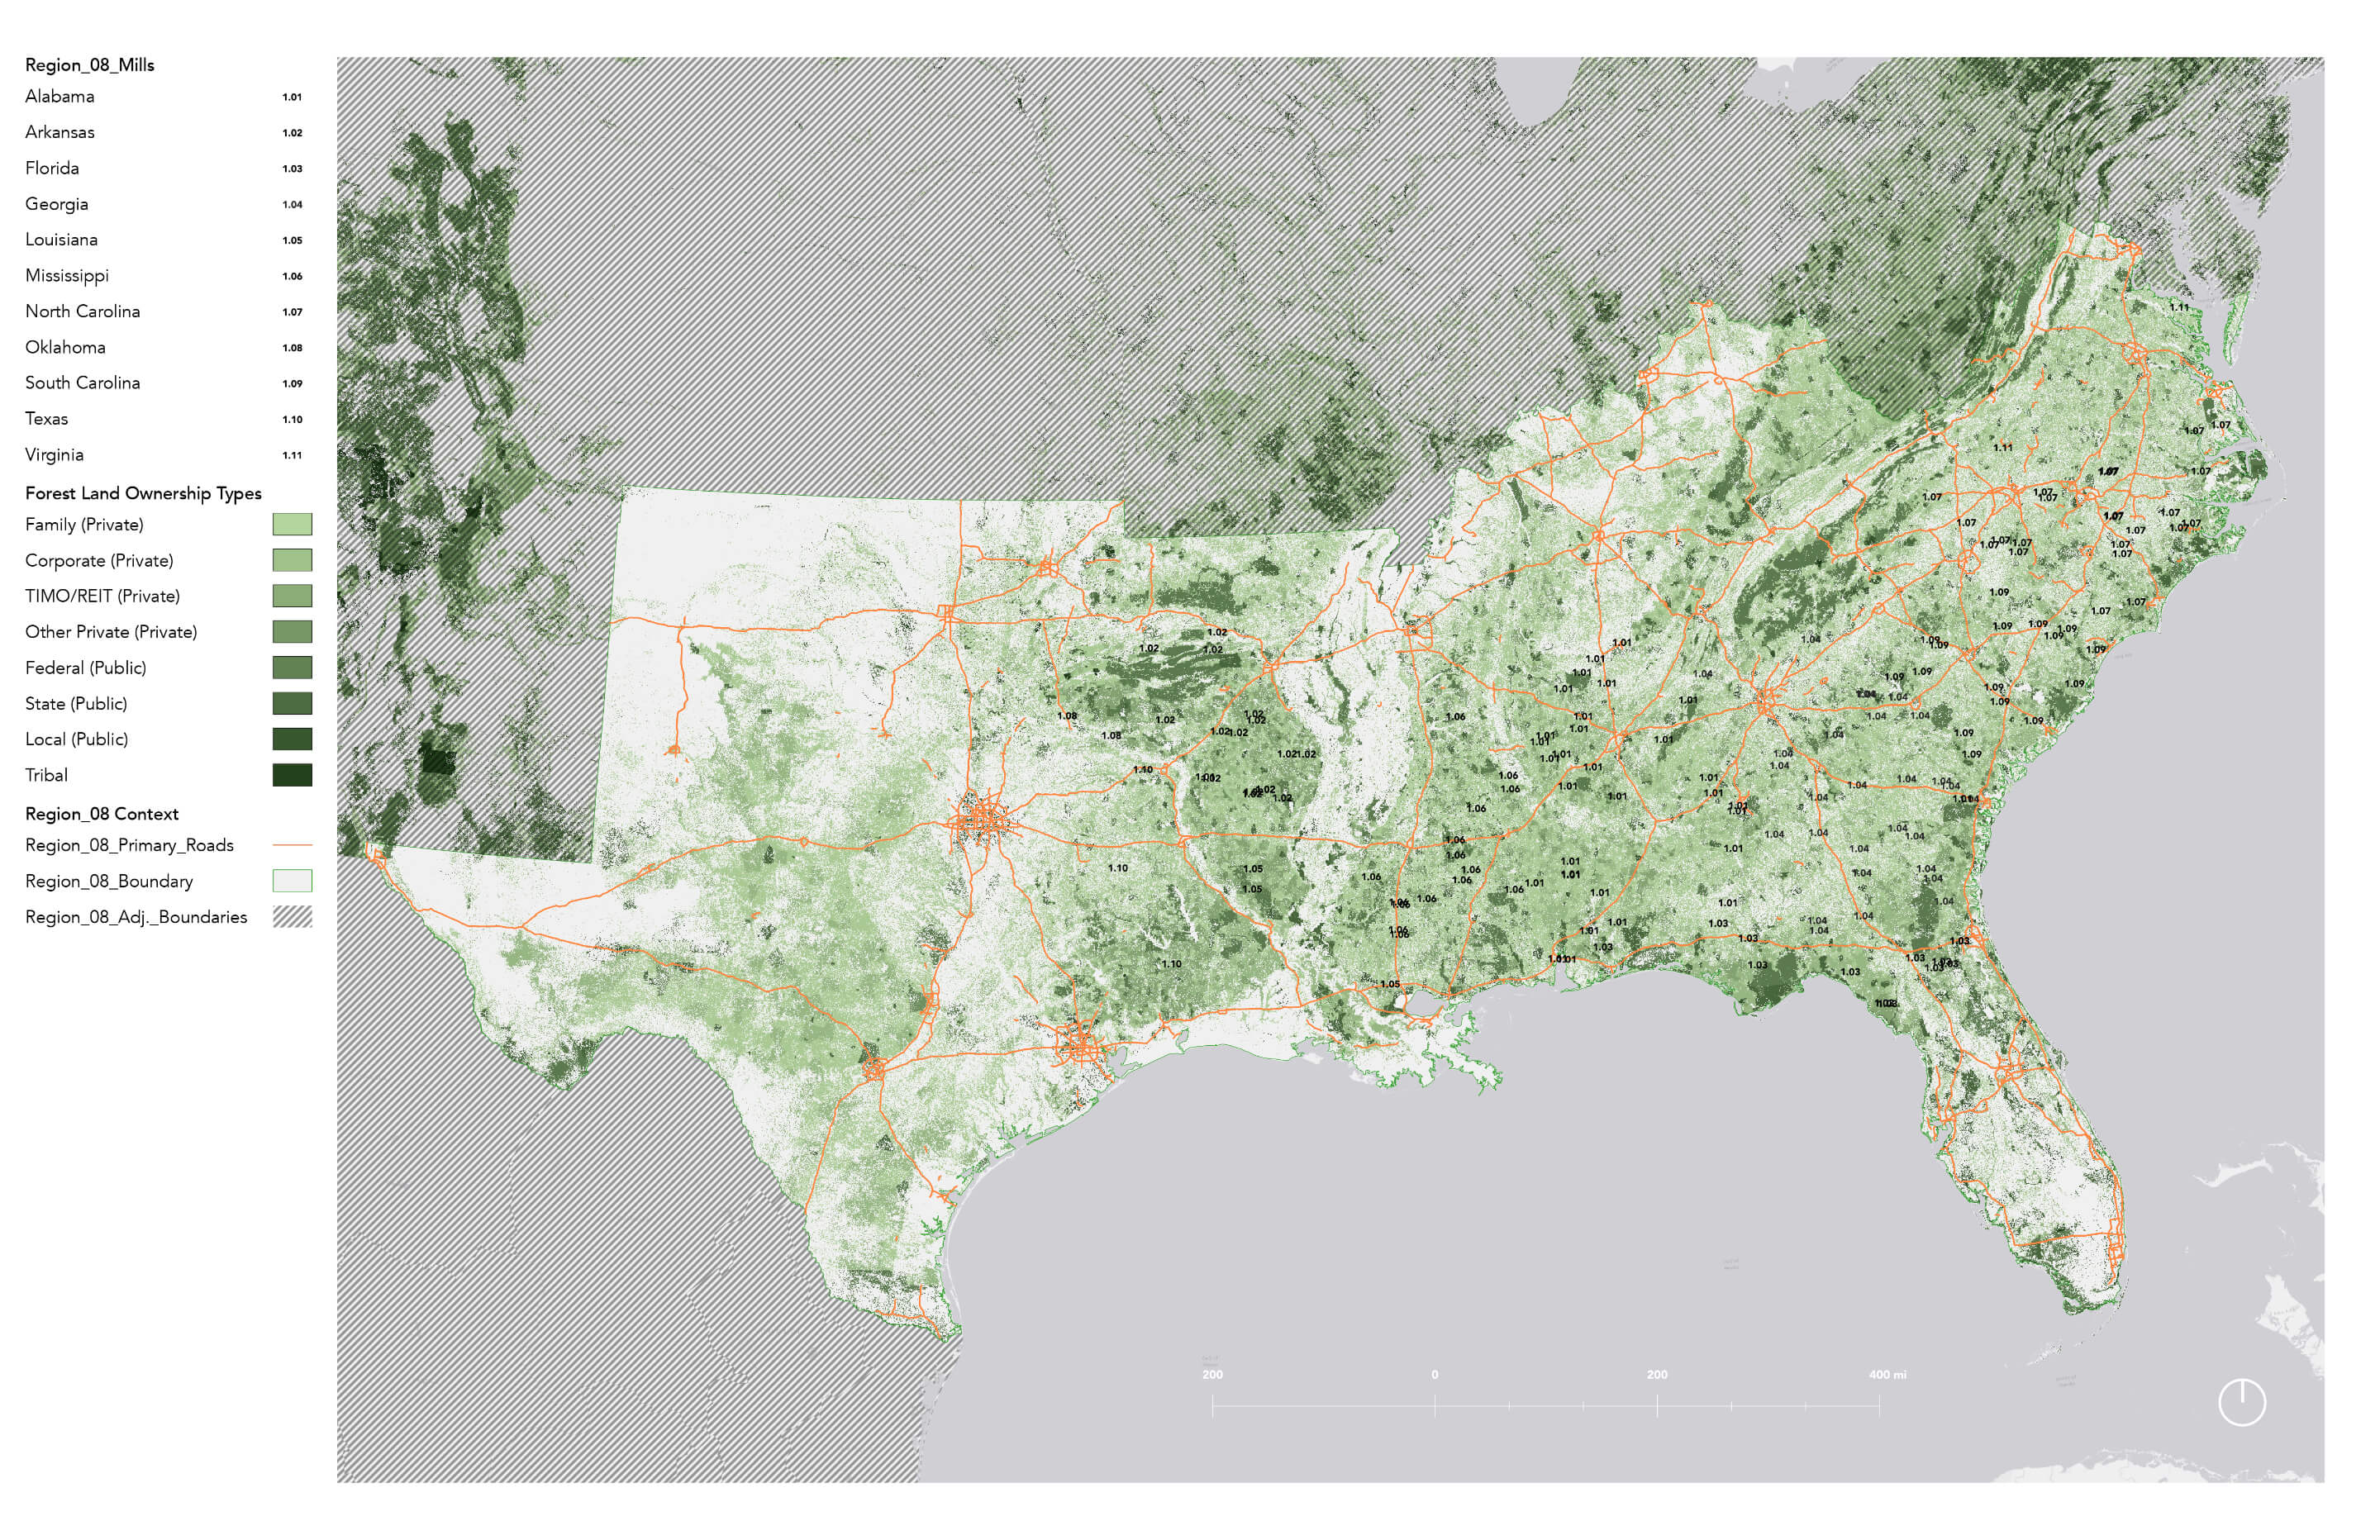 A map of forest and mill locations across the southeast us